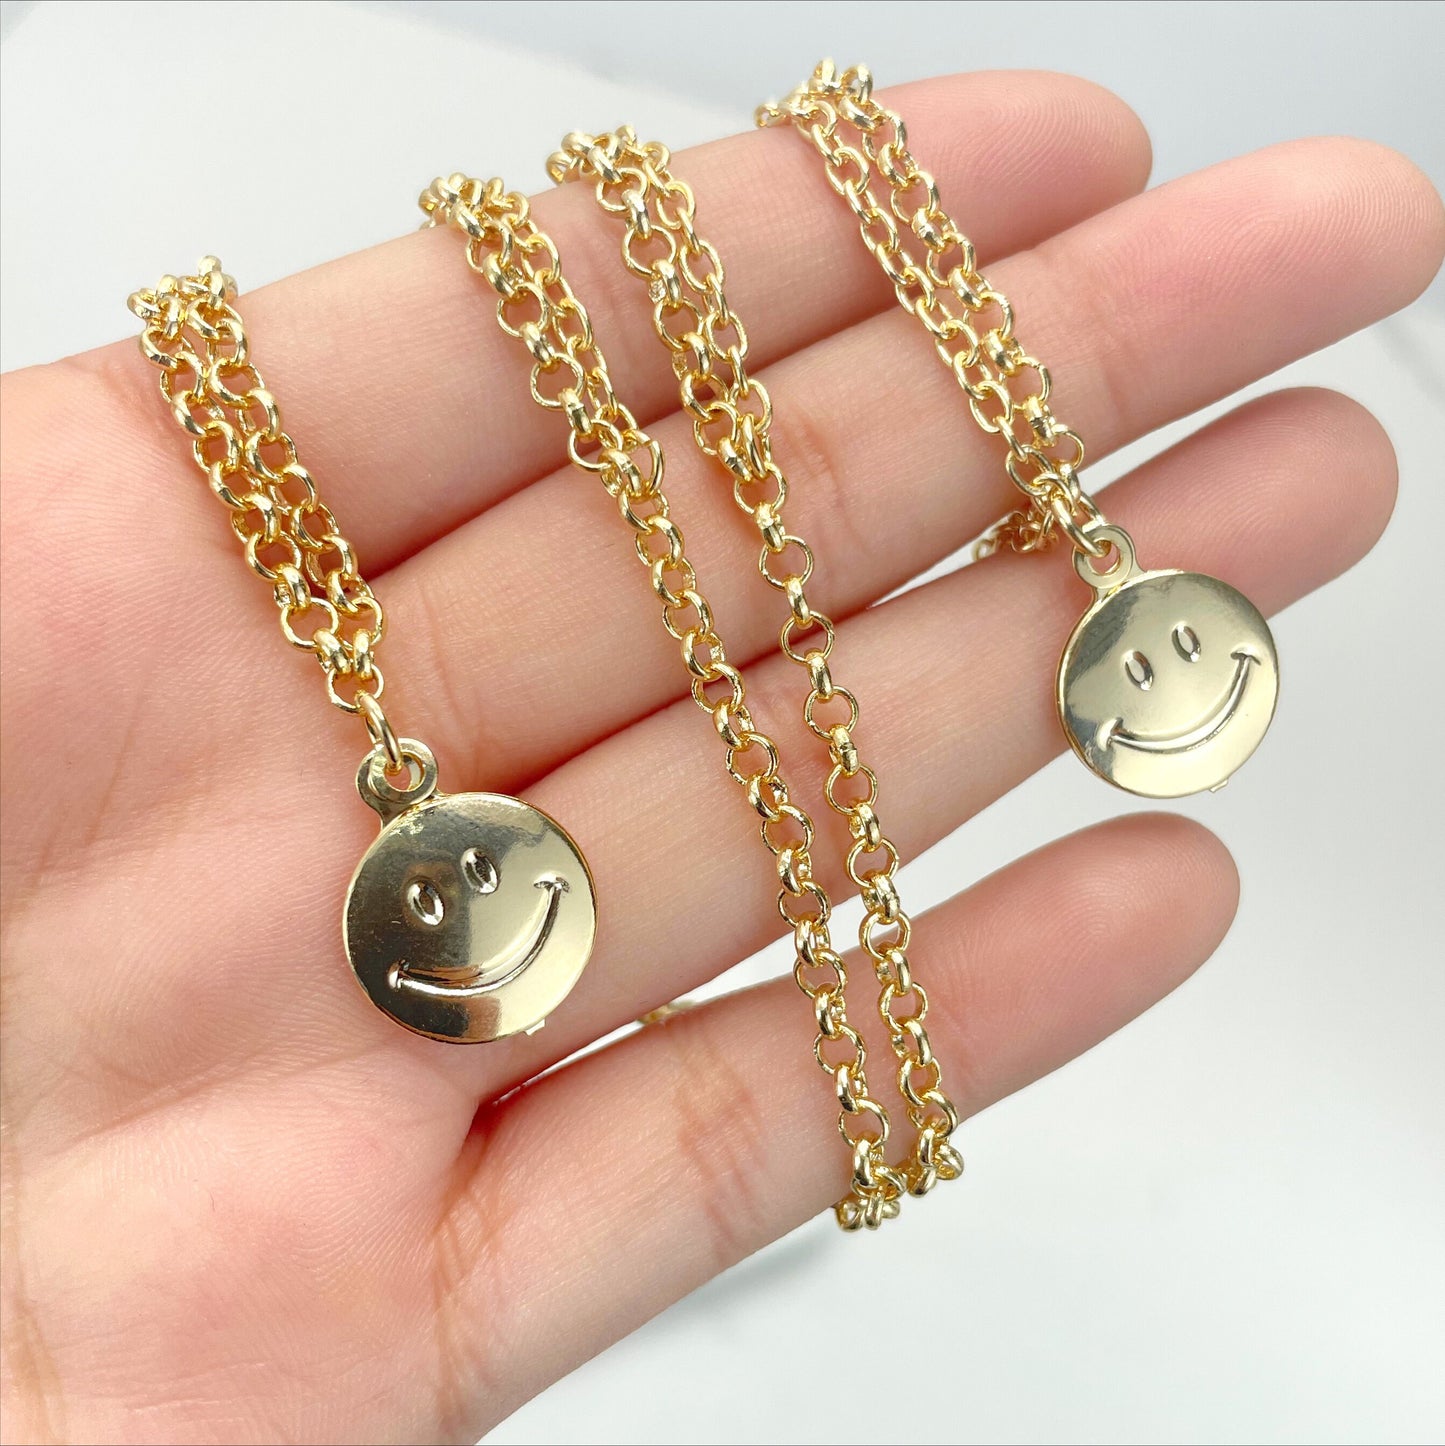 18k Gold Filled Double 3mm Rolo Chain& Oval Chain with Smile Happy Face Charms Necklace or Bracelet, Wholesale Jewelry Making Supplies